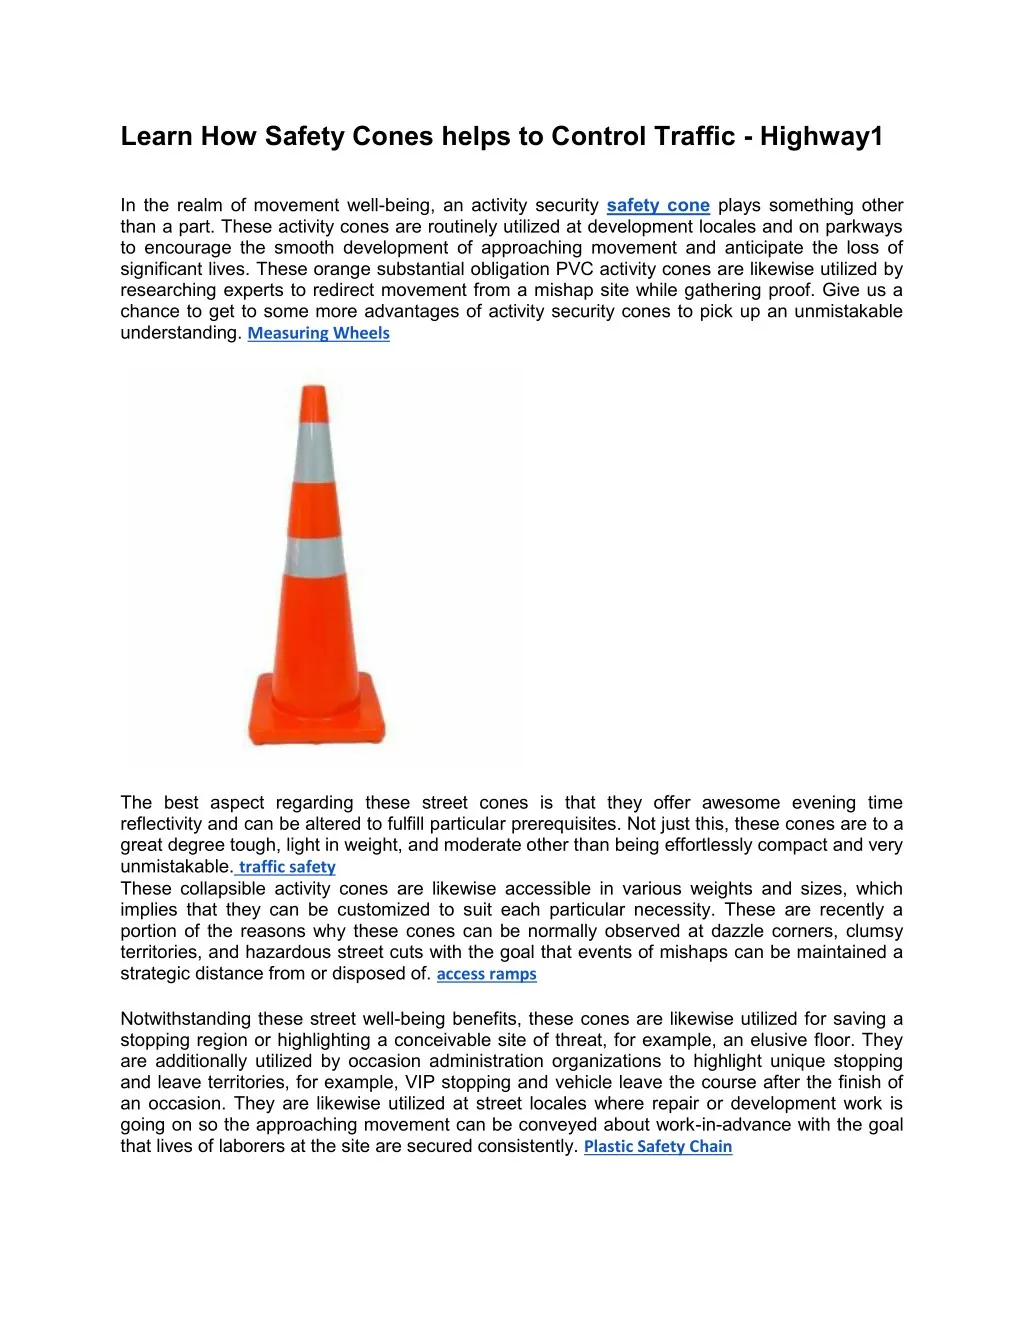 learn how safety cones helps to control traffic